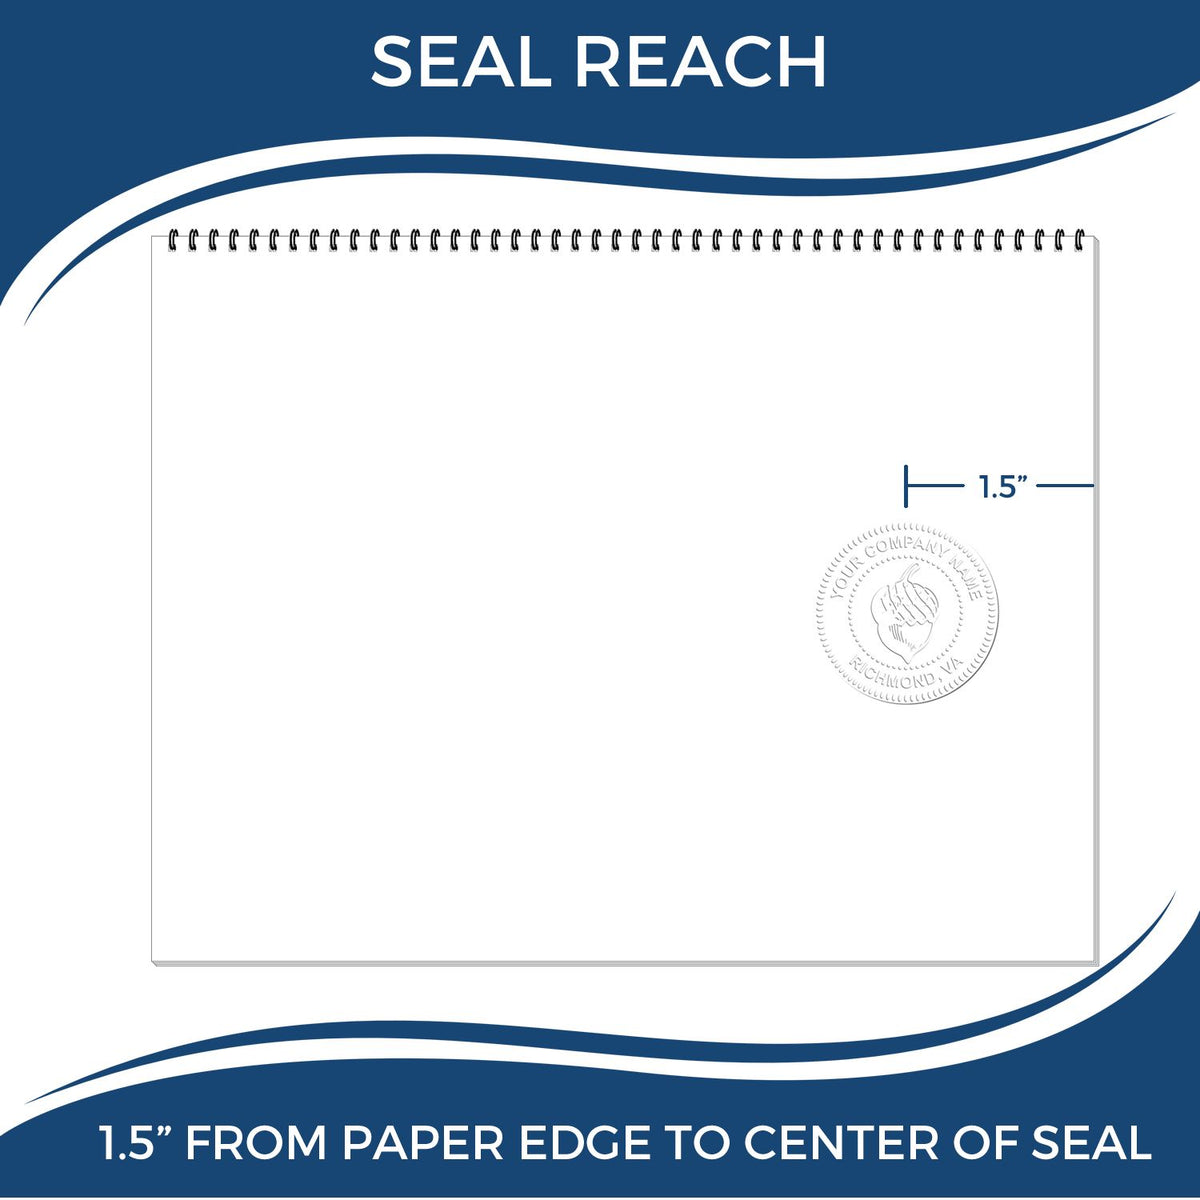 An infographic showing the seal reach which is represented by a ruler and a miniature seal image of the Gift Indiana Landscape Architect Seal